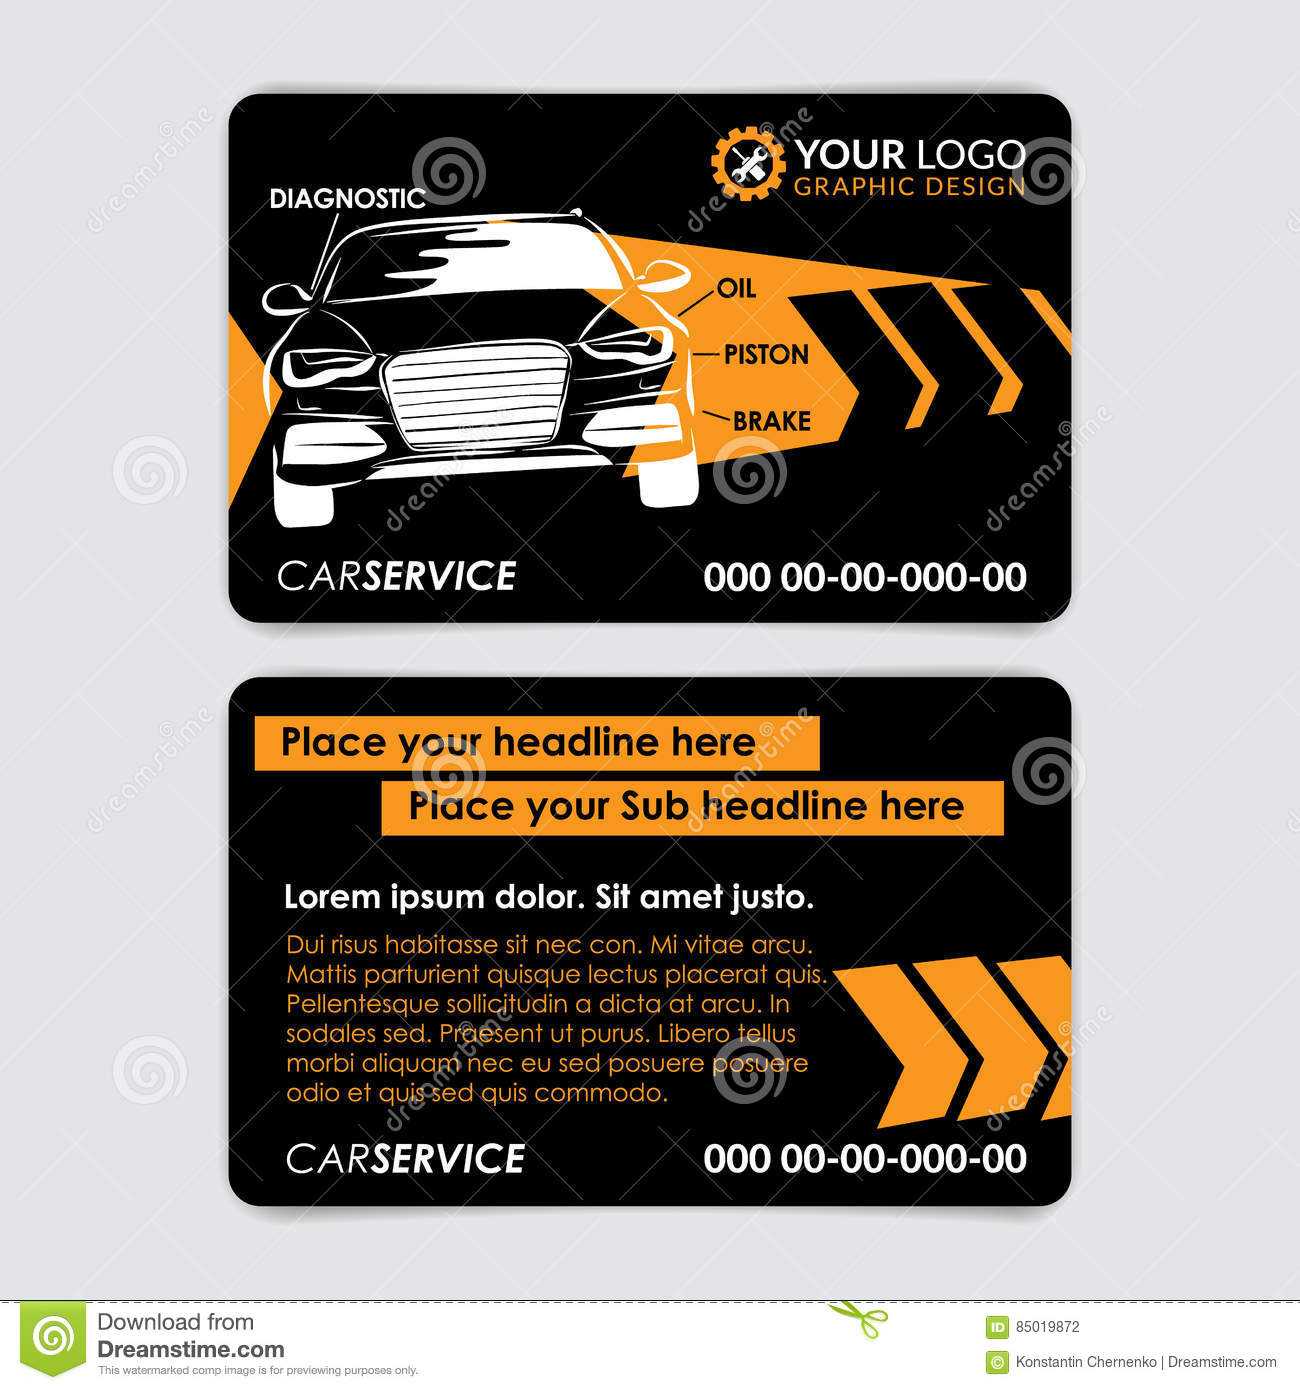 Auto Repair Business Card Template. Create Your Own Business Pertaining To Automotive Business Card Templates